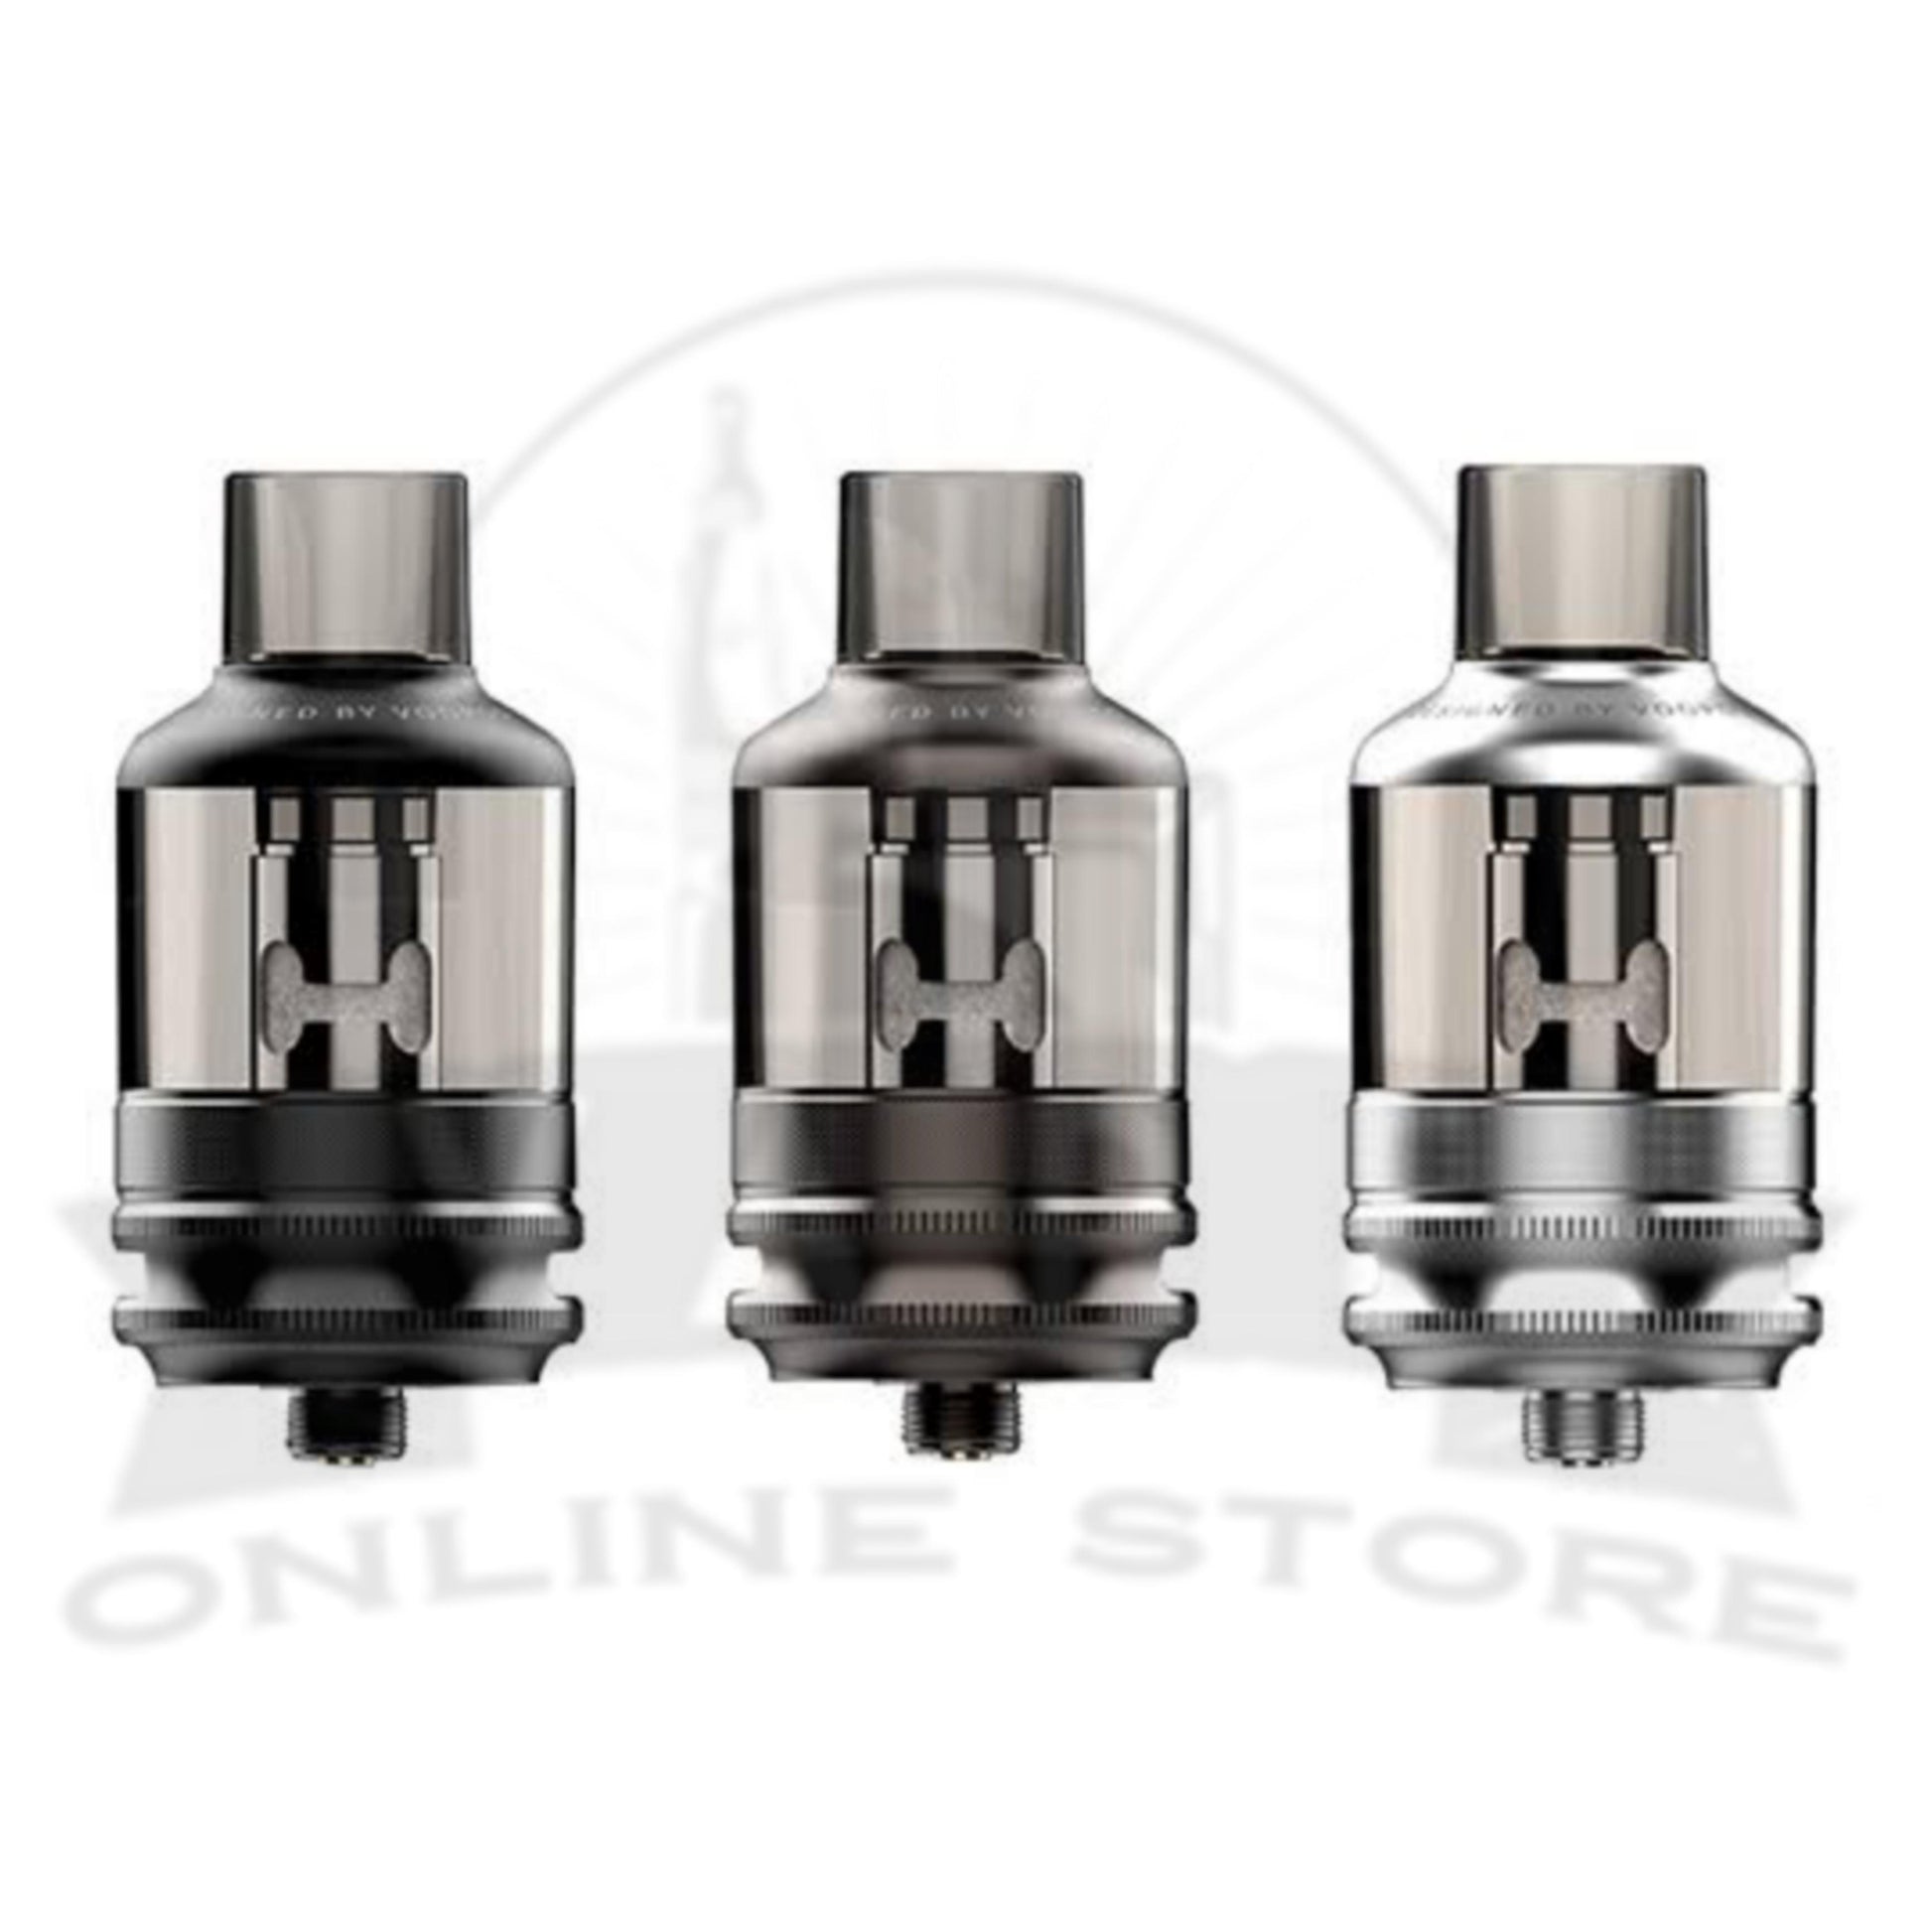 VooPoo TPP Pod Tank | Check Our Price